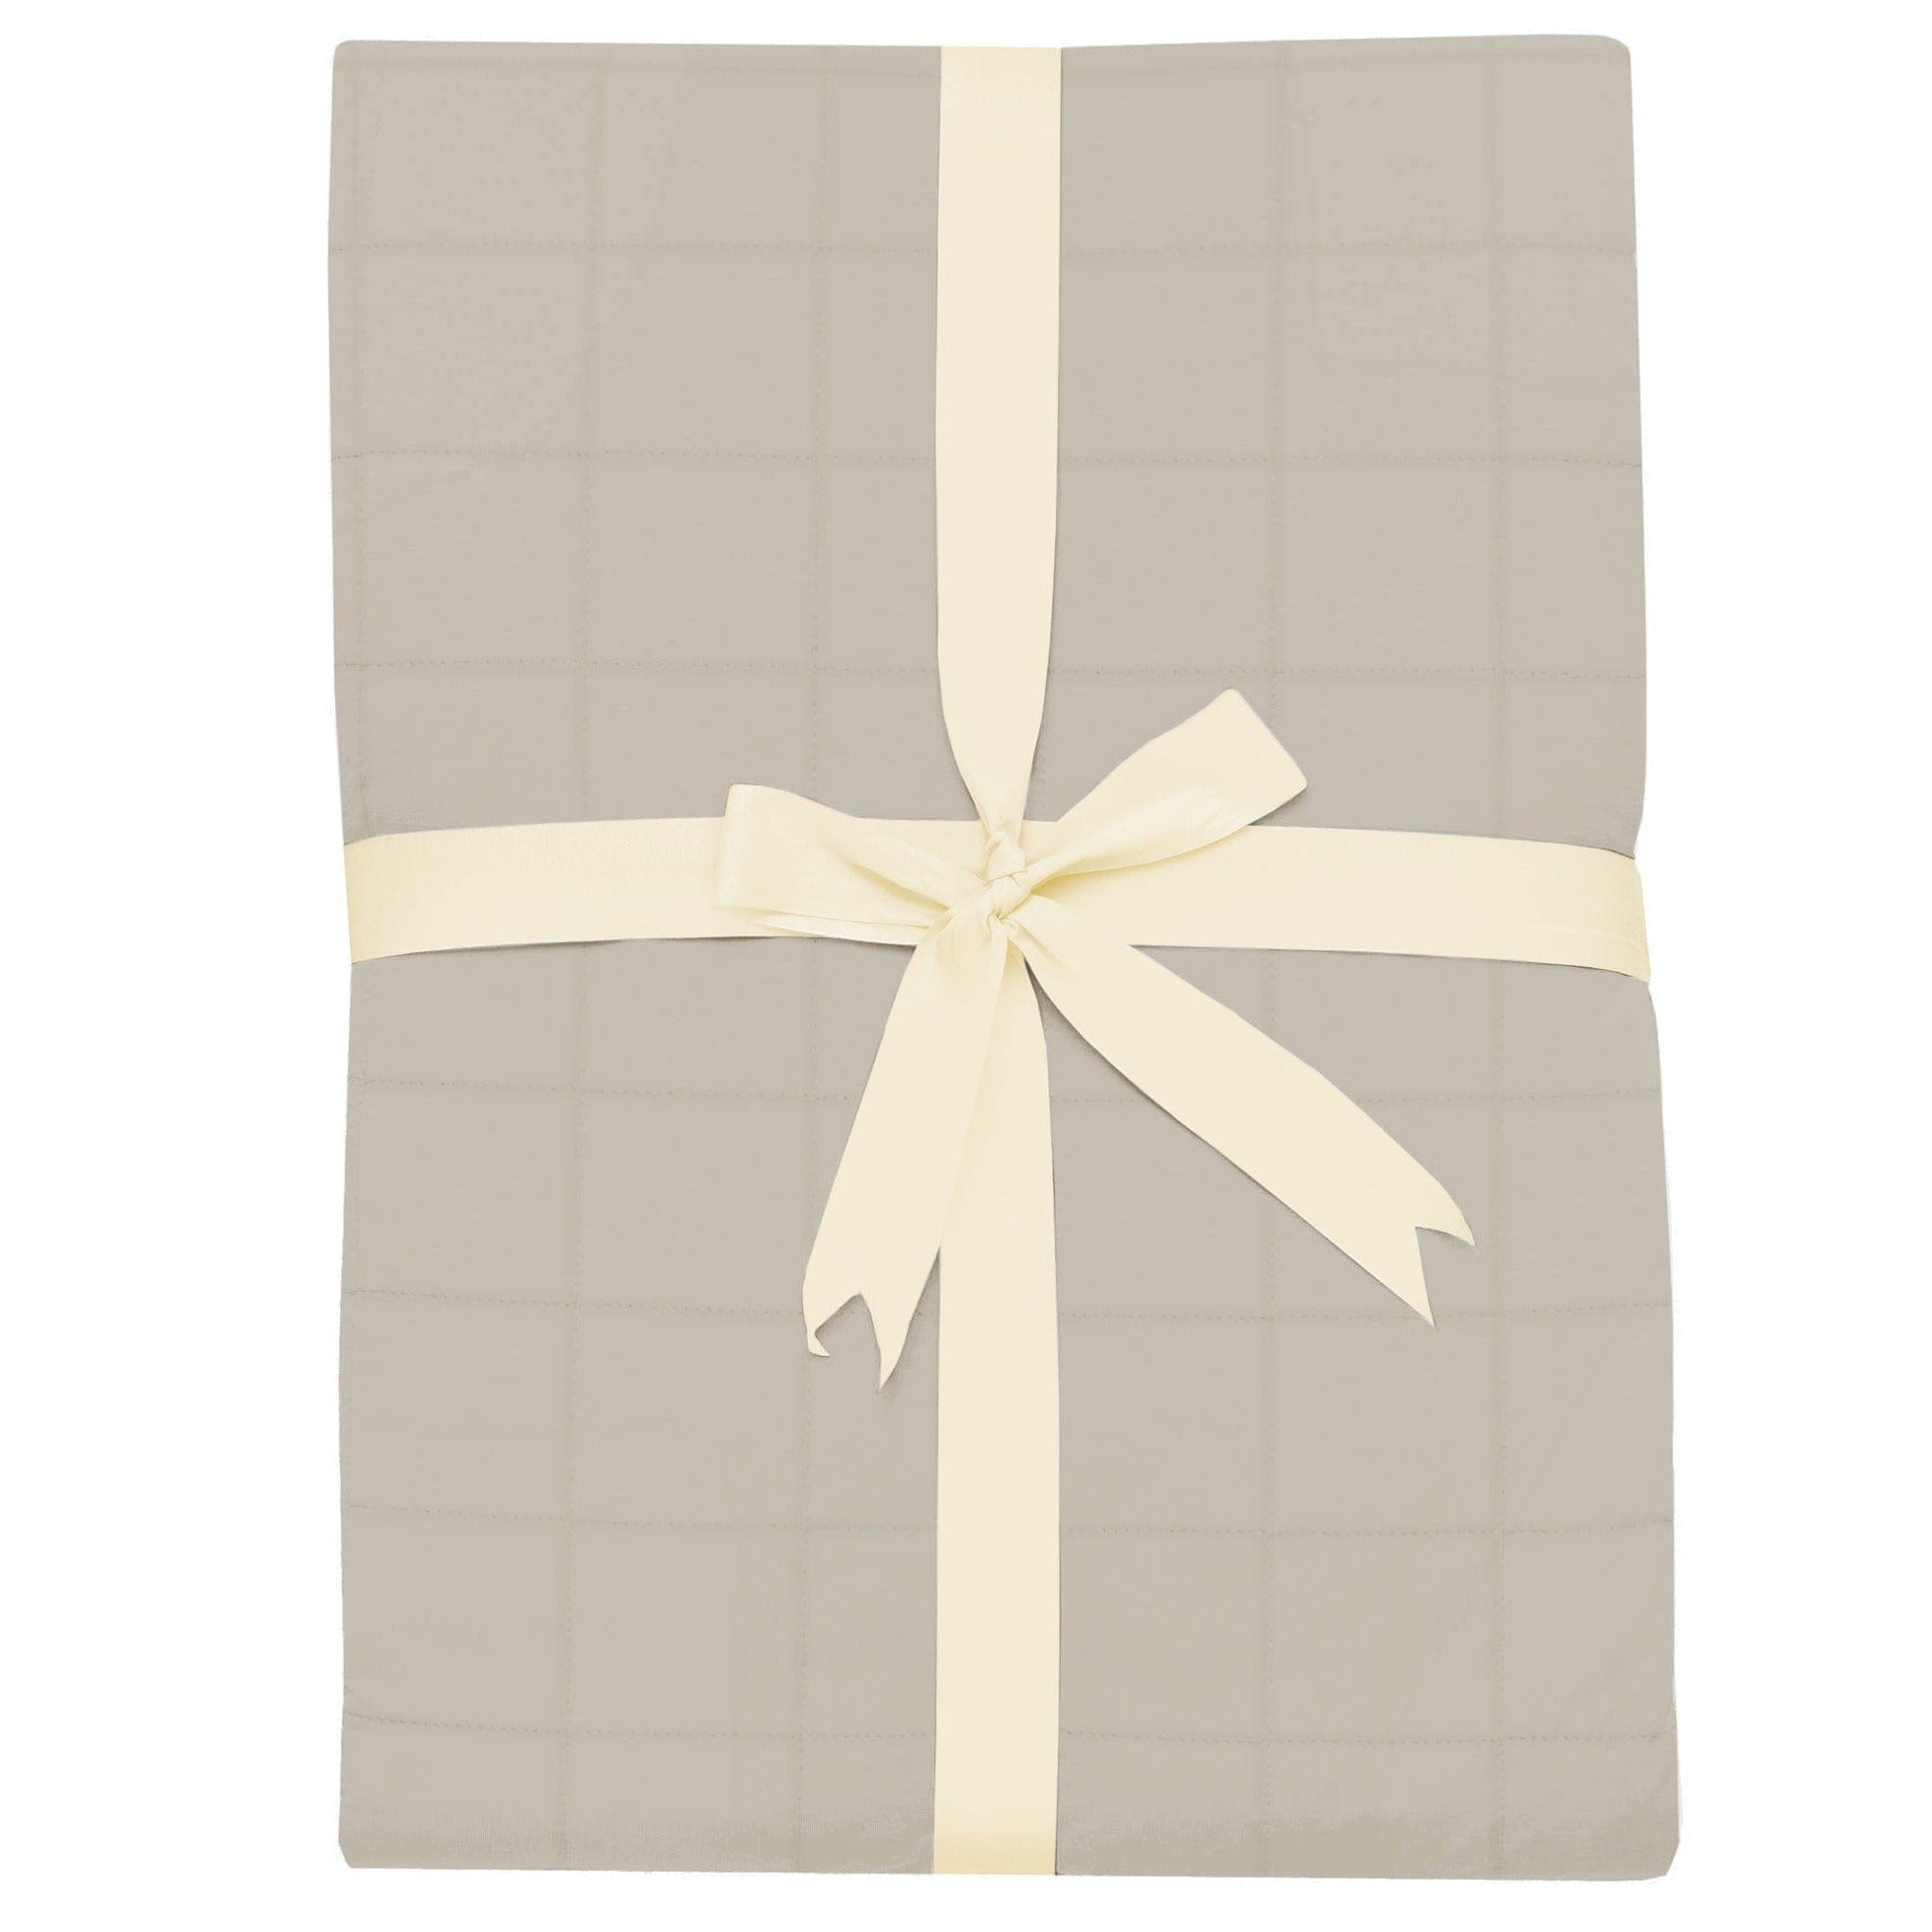 Kyte BABY Adult Blanket 1.0 Khaki / Adult Adult Quilted Blanket in Khaki 1.0